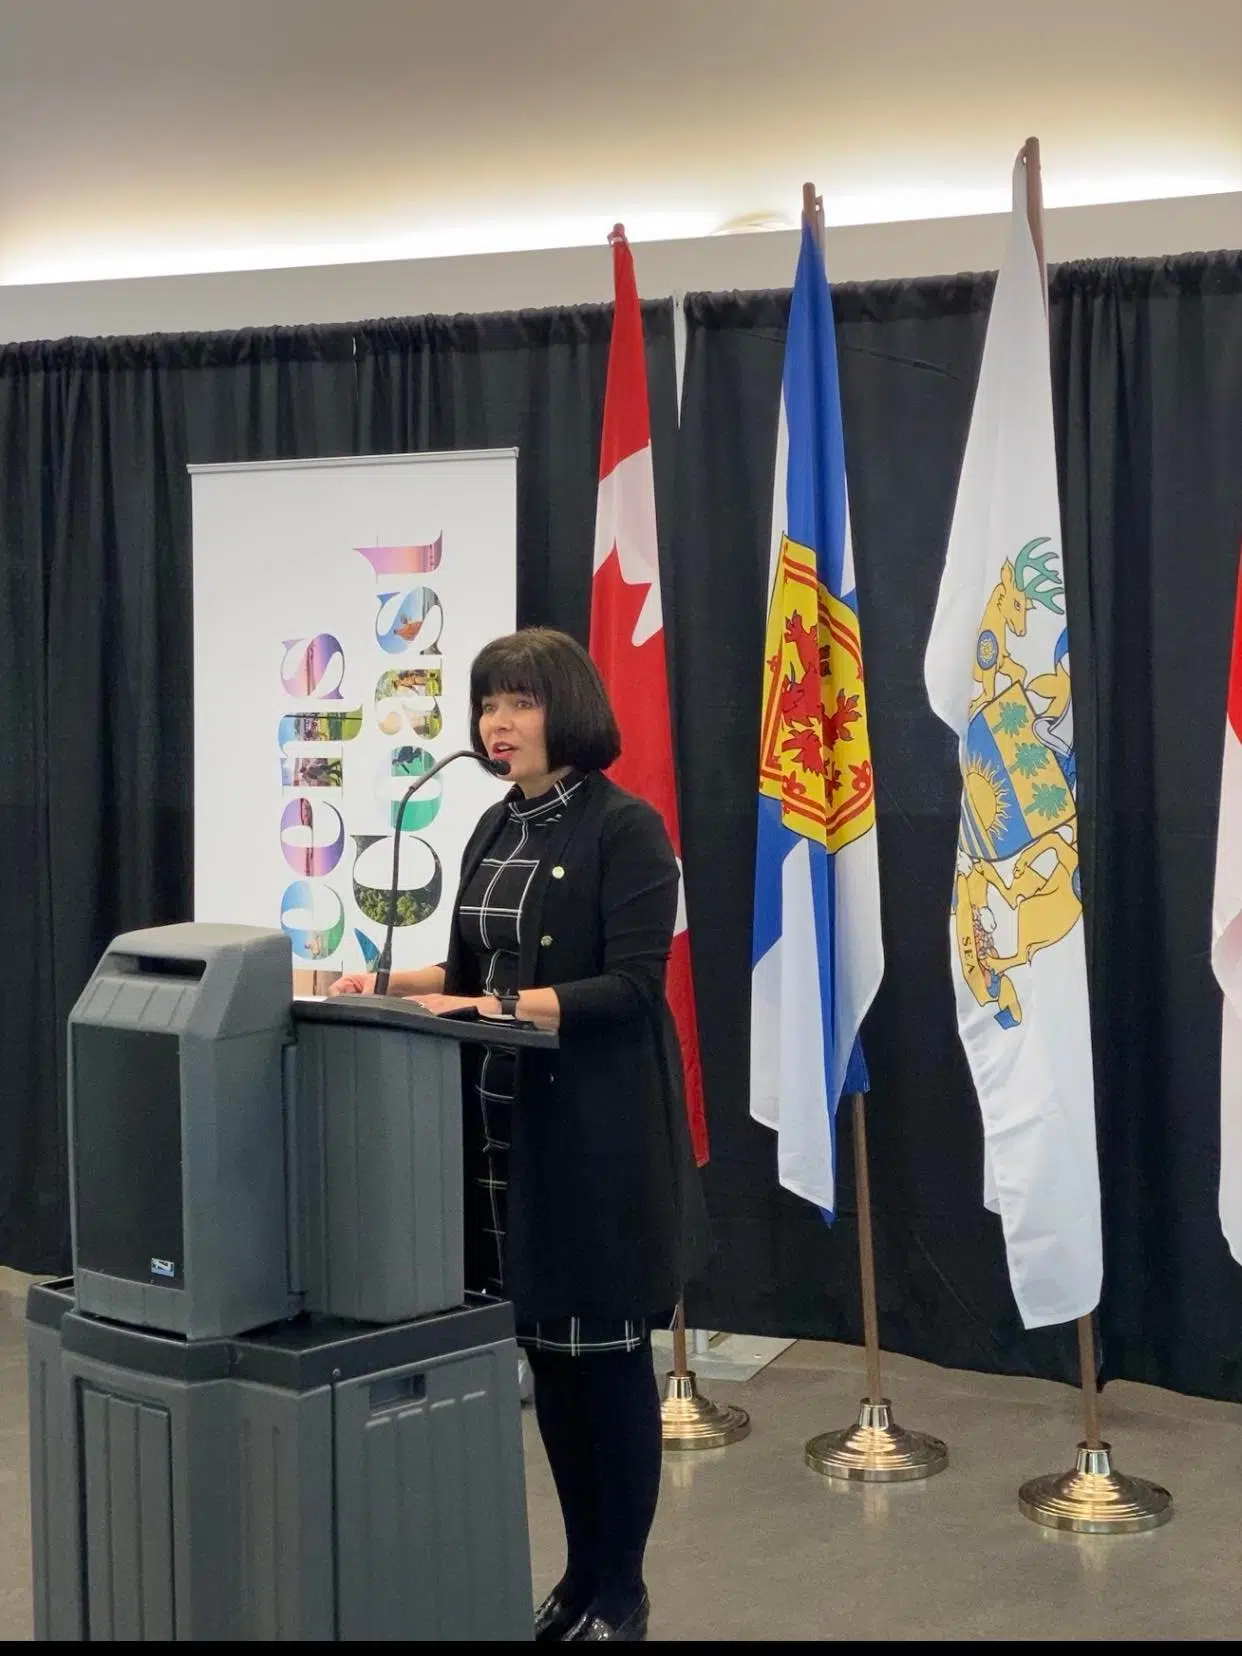 ACOA Announces $2.4M in Funding for 23 Local Organizations